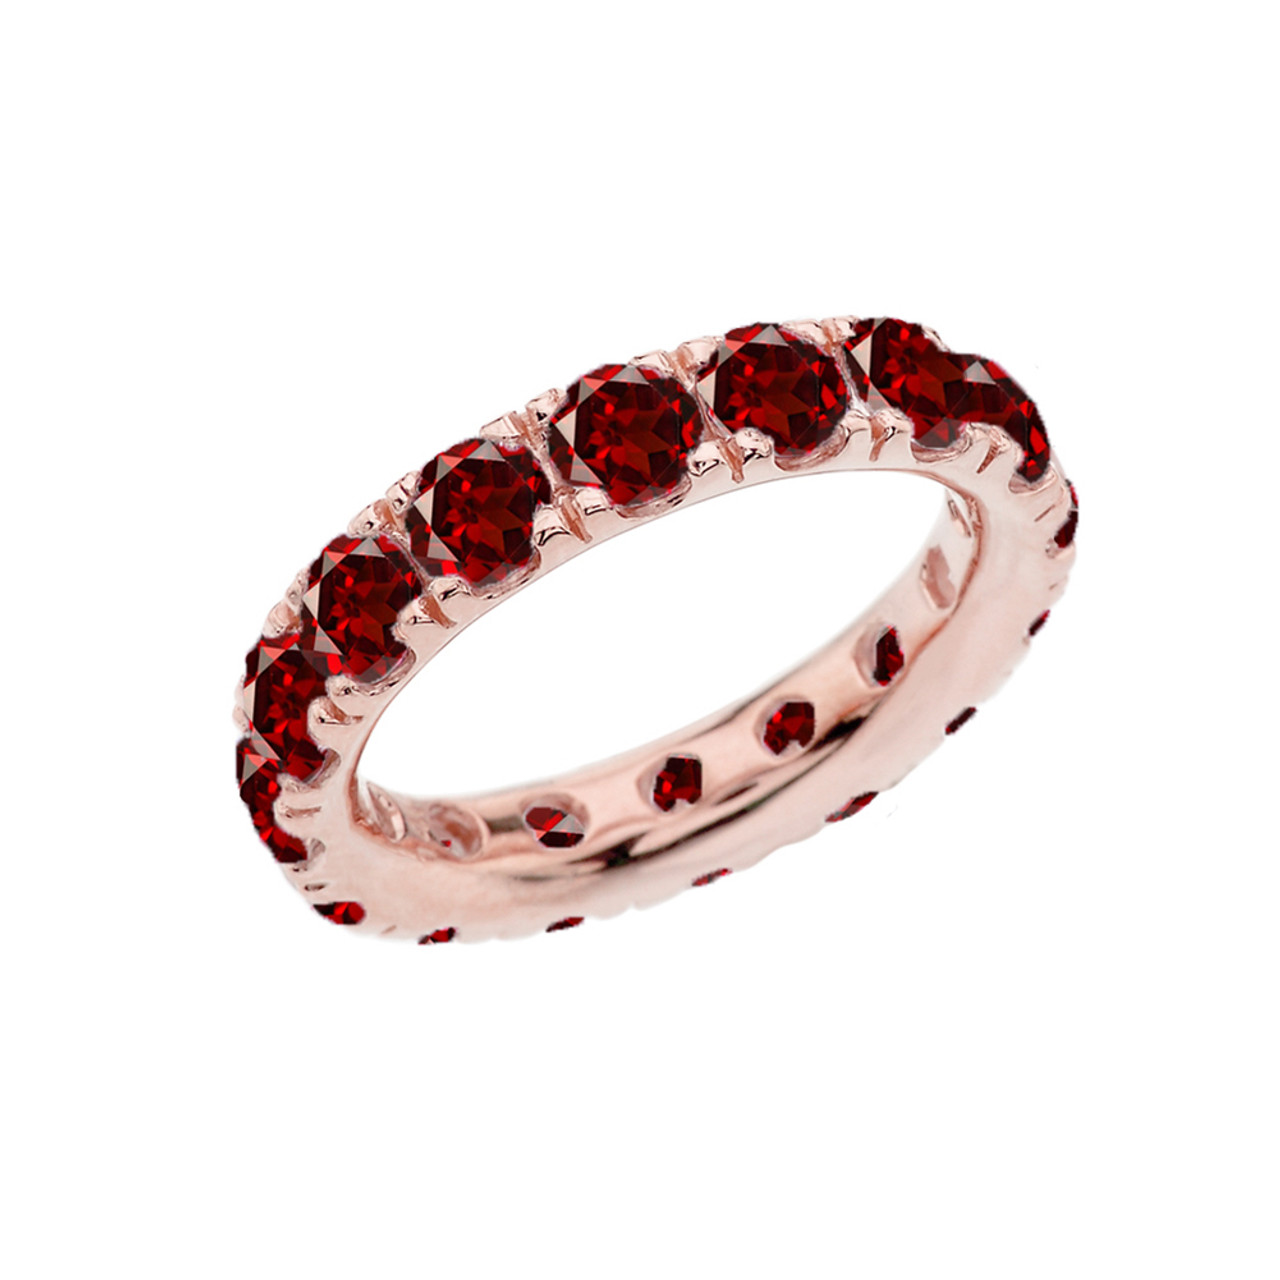 4mm Comfort Fit Rose Gold Eternity Band With 5.10 ct January Birthstone  Genuine Garnet